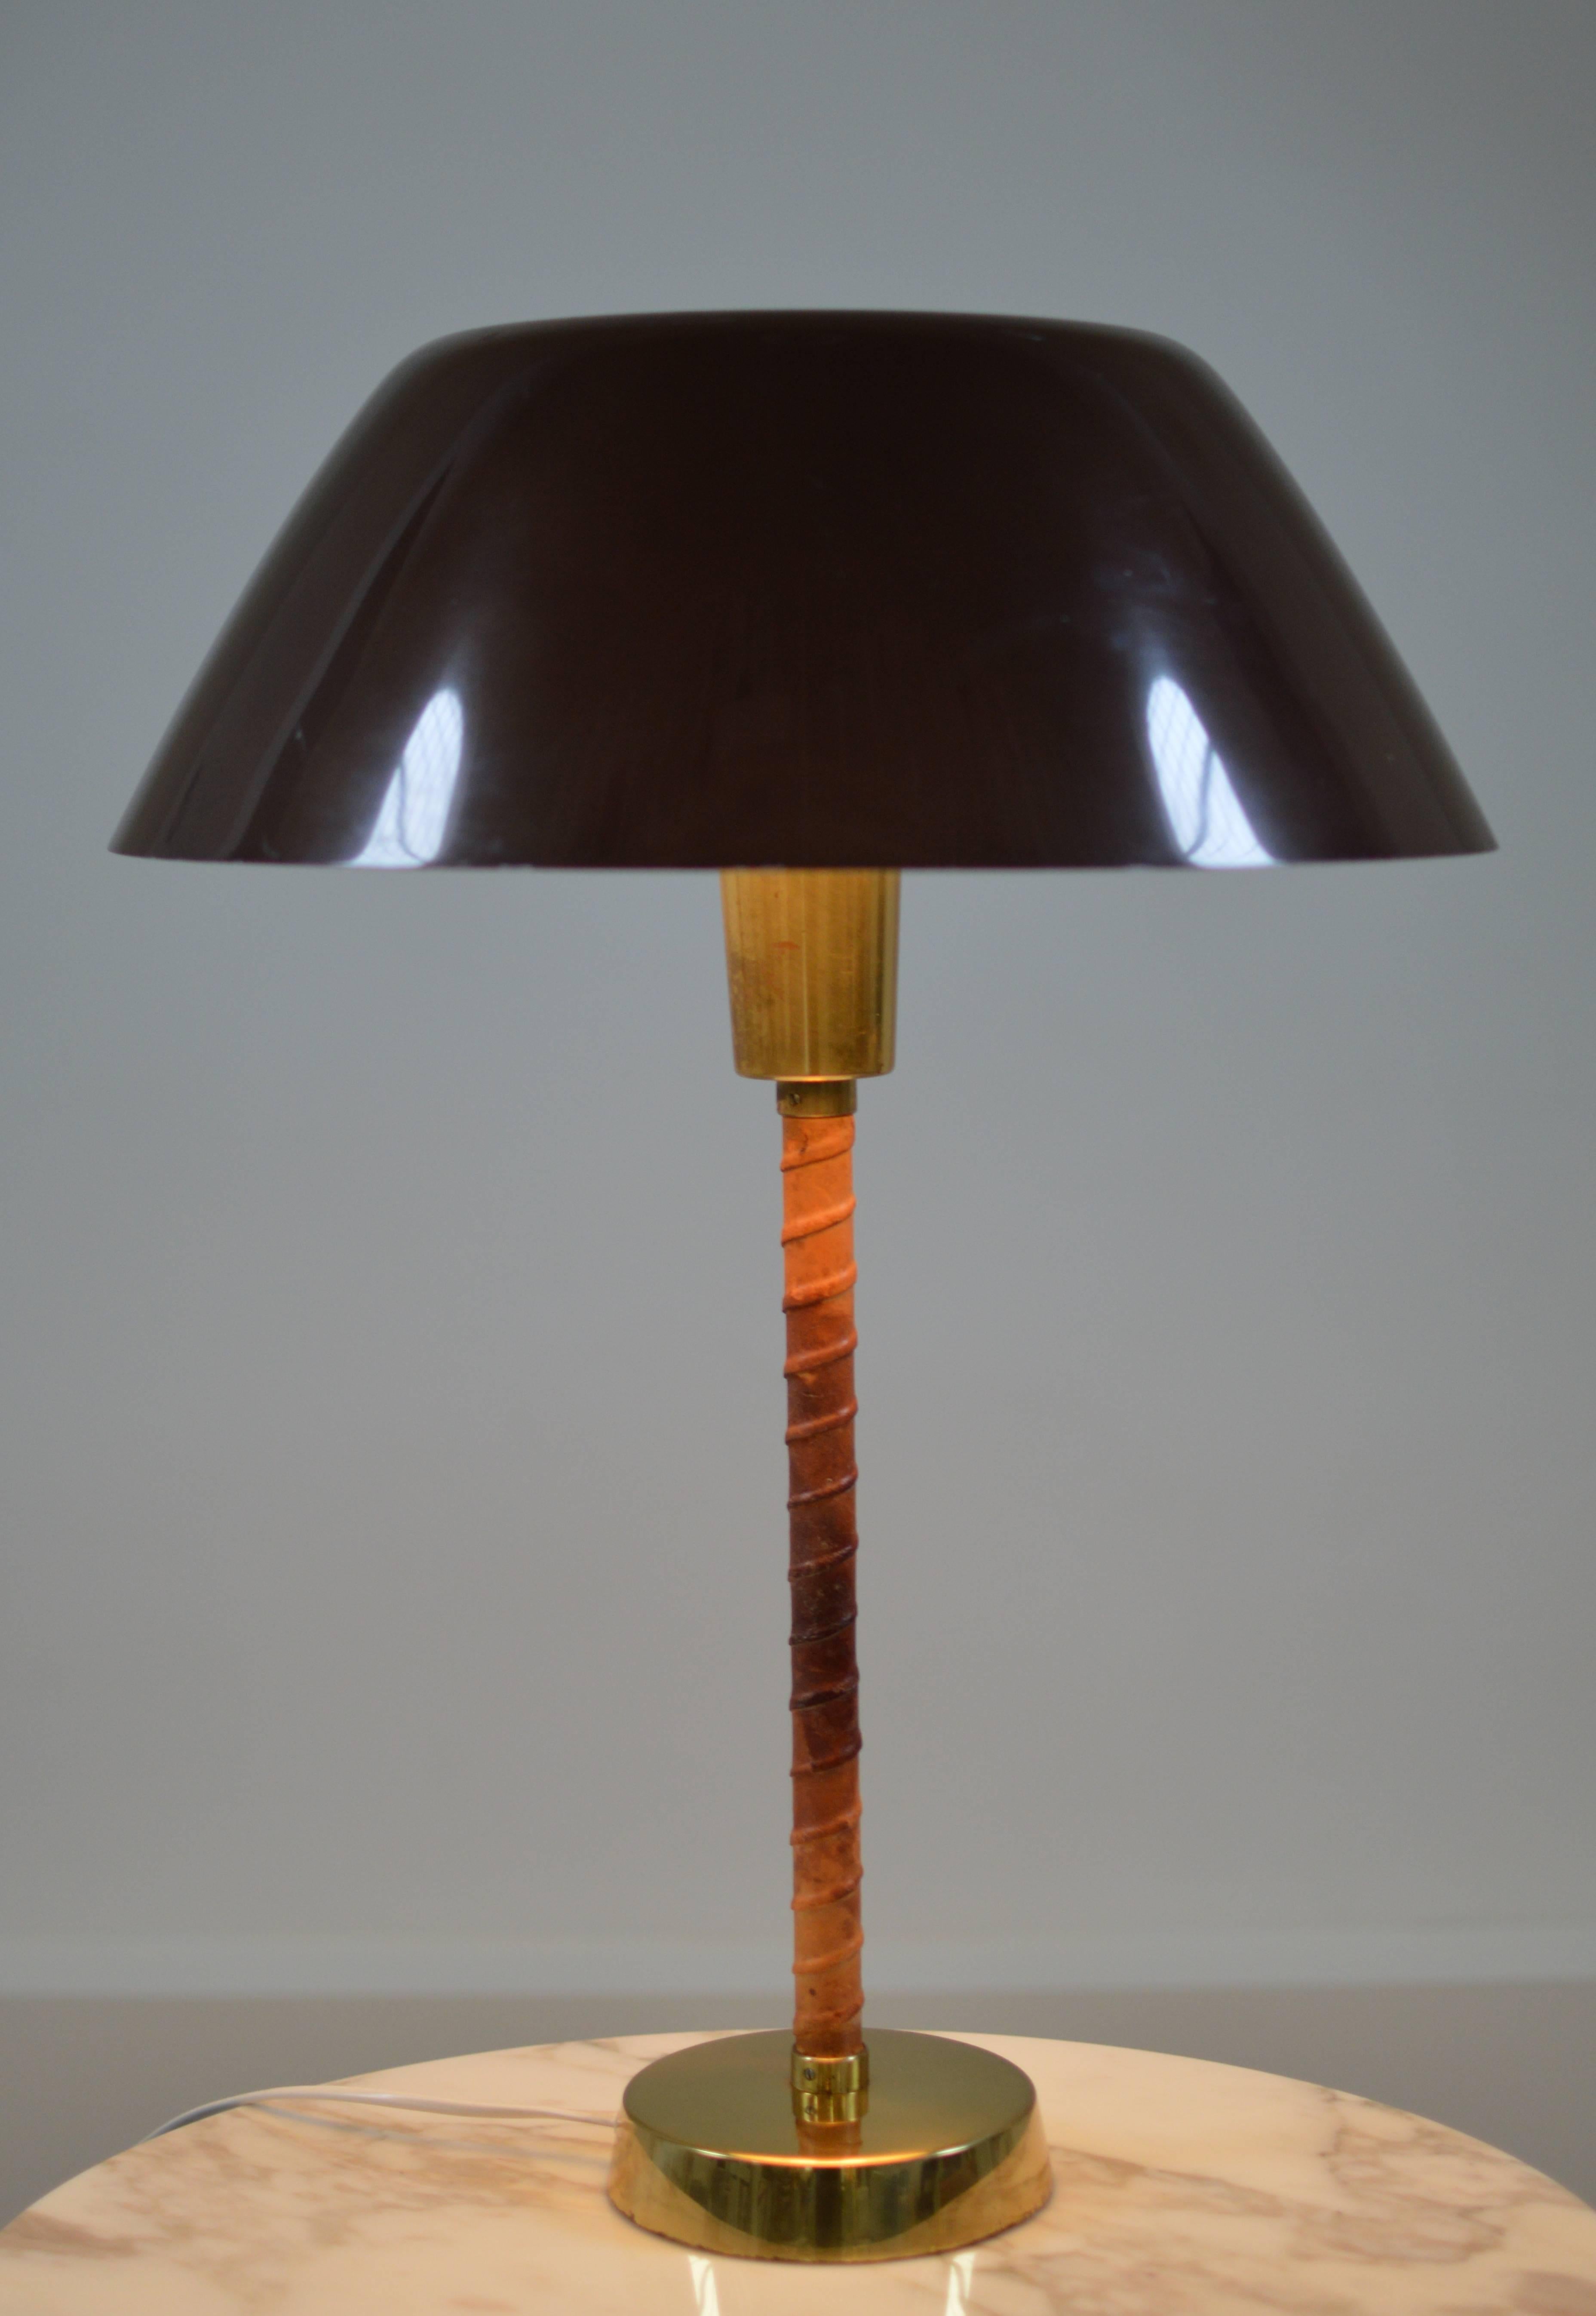 Beautiful table lamp by Finnish designer Lisa Johansson-Pape for Stockmann Orno Finland. 
Leather covered heavy solid brass stem with acrylic diffuser and dark brown lacquered steel shade. 

Lisa Johansson-Pape's career began at Stockmann Orno in